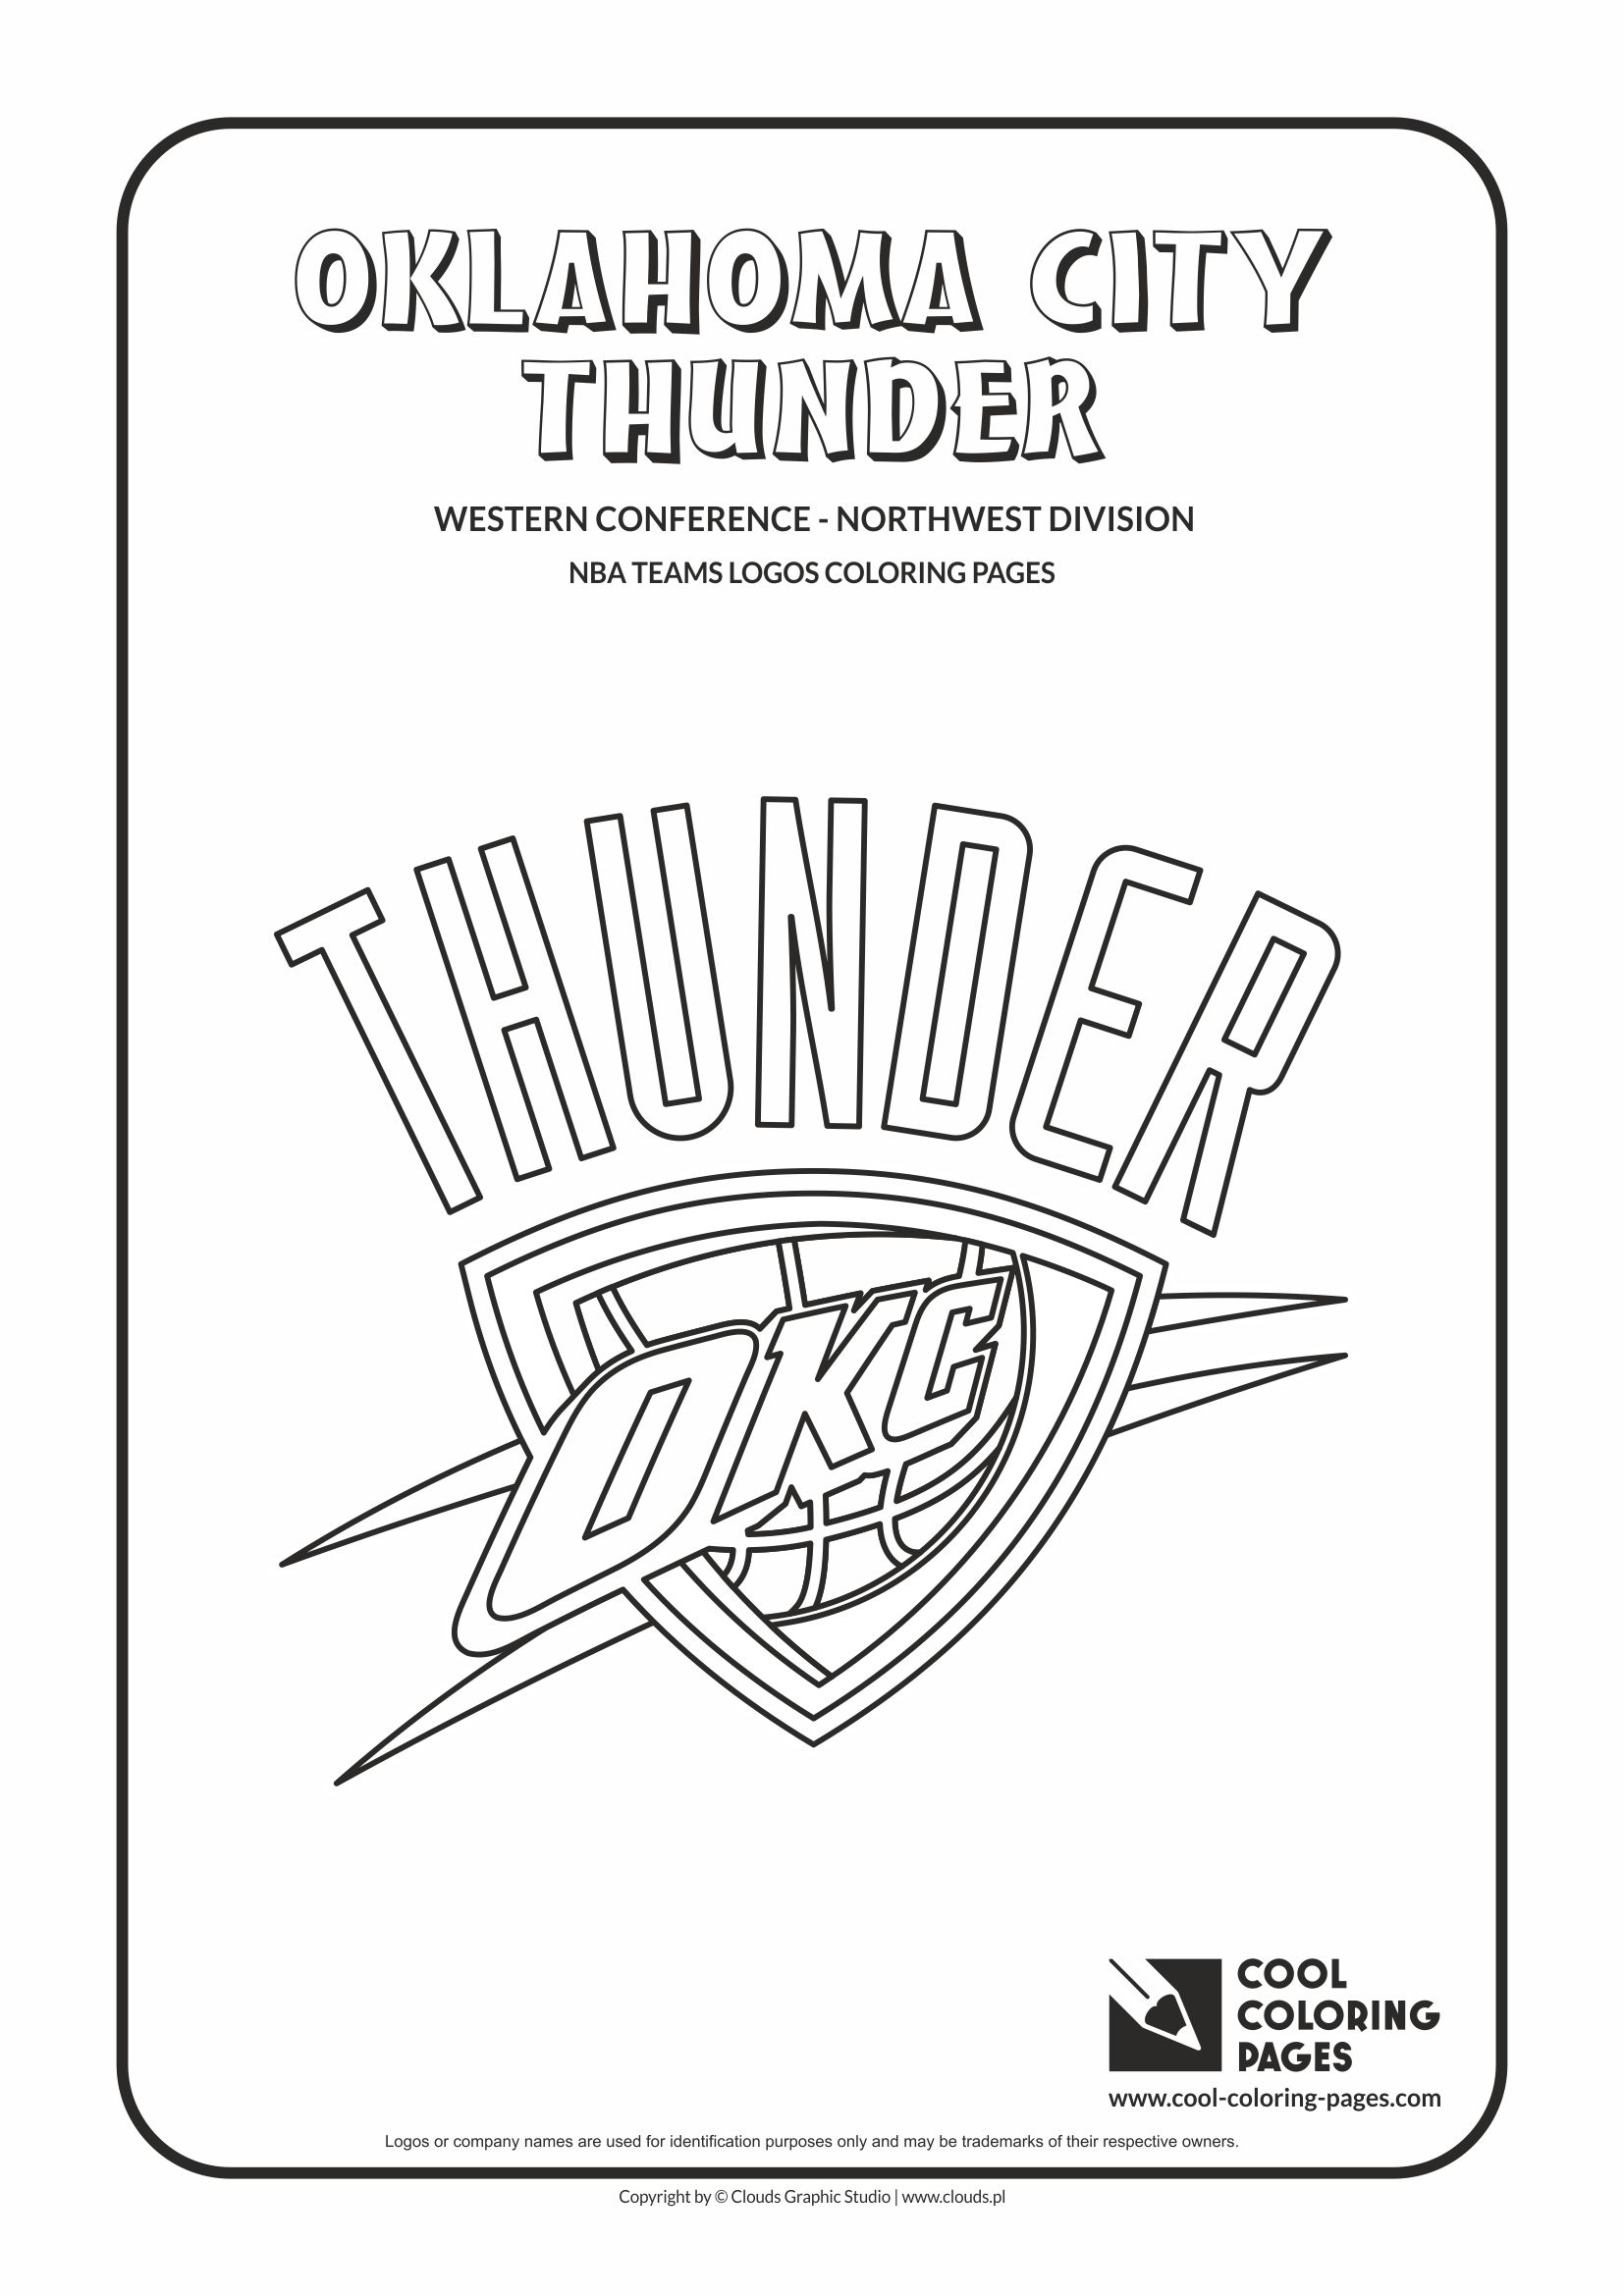 Nba Teams Logos Coloring Pages Cool Basketball Clubs Western Conference